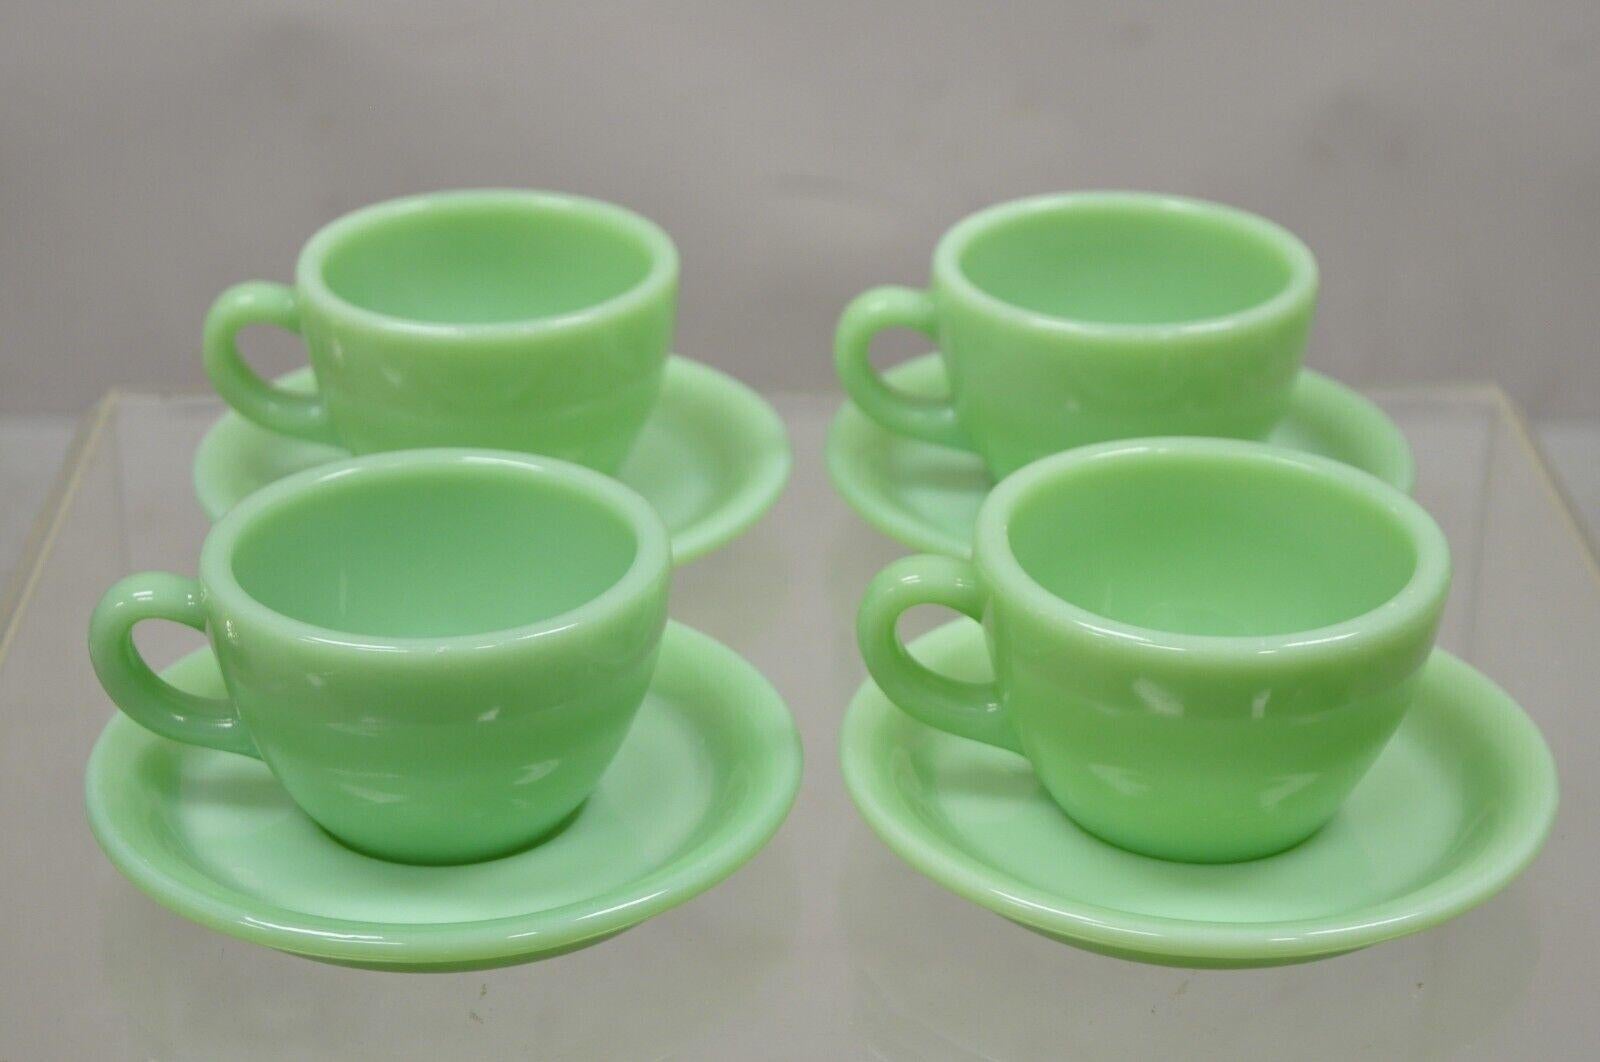 Vintage Fire King Jadeite Green Oven Ware Coffee Cup and Saucer - Set of 4. Circa Mid 20th Century.
Measurements: 
(4) Cups: 2.5